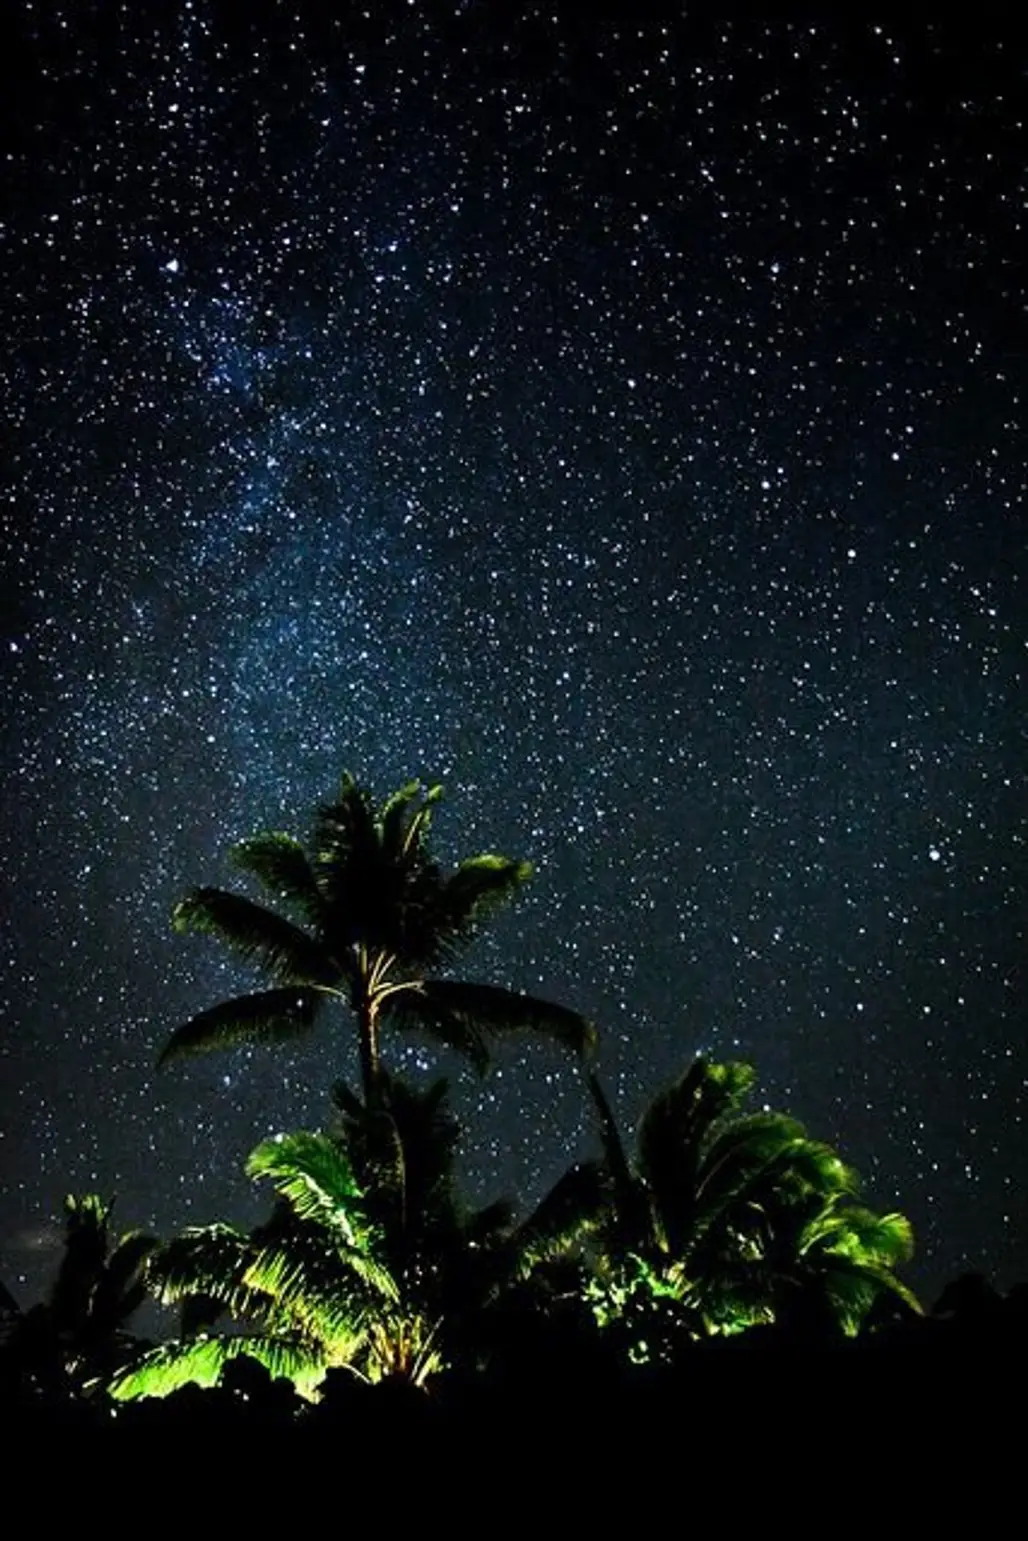 The Milky Way in Maui